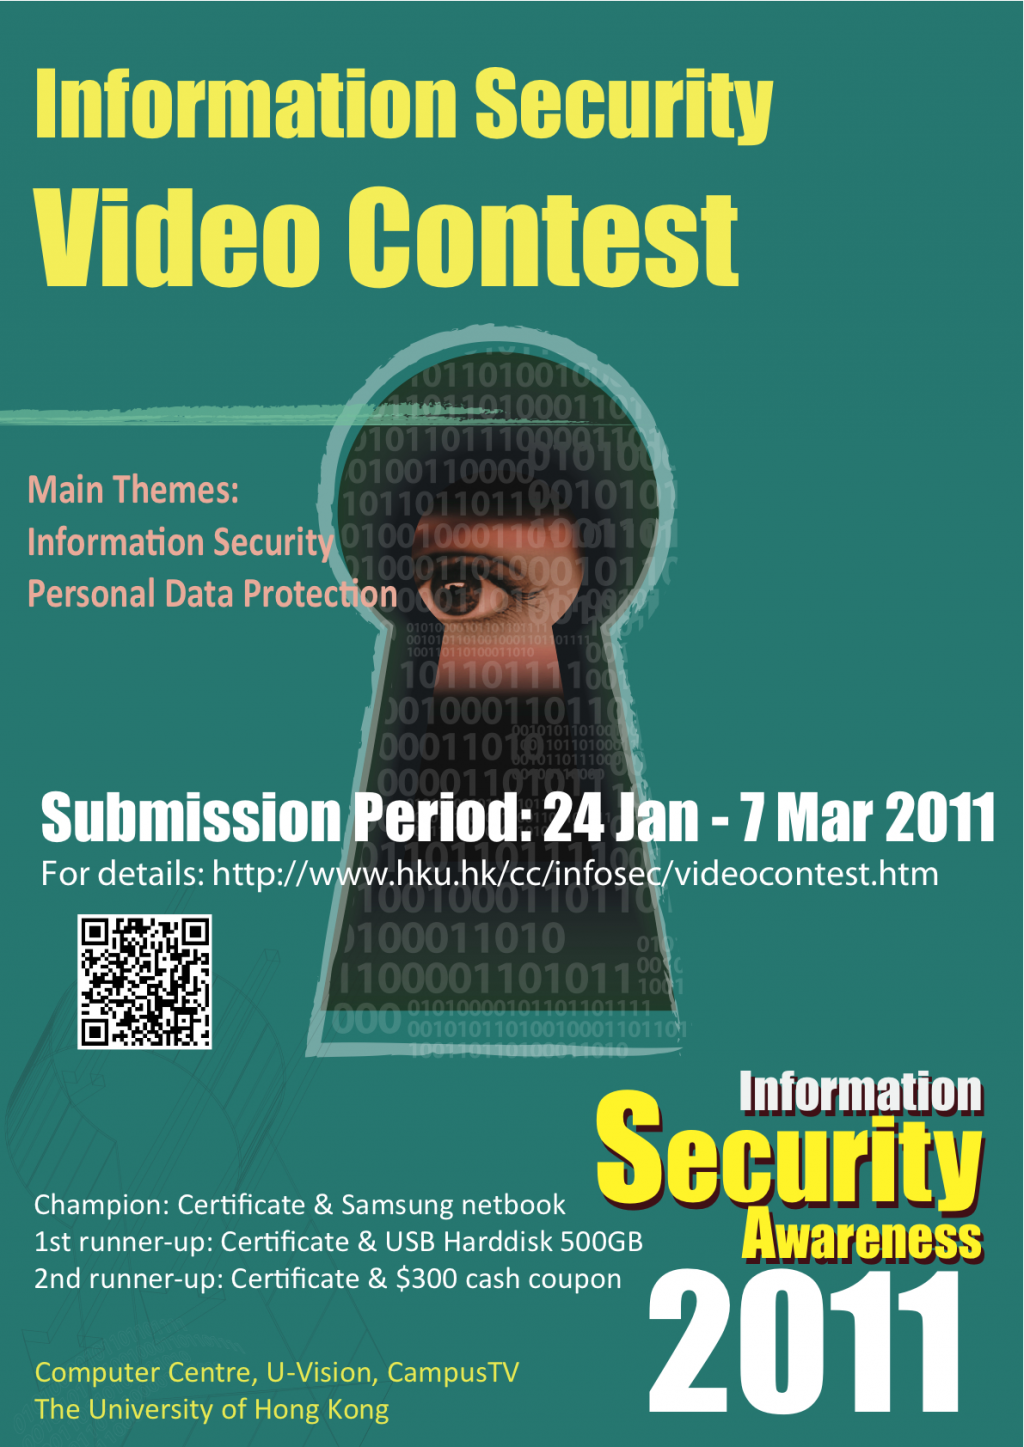 Video Contest on Information Security.